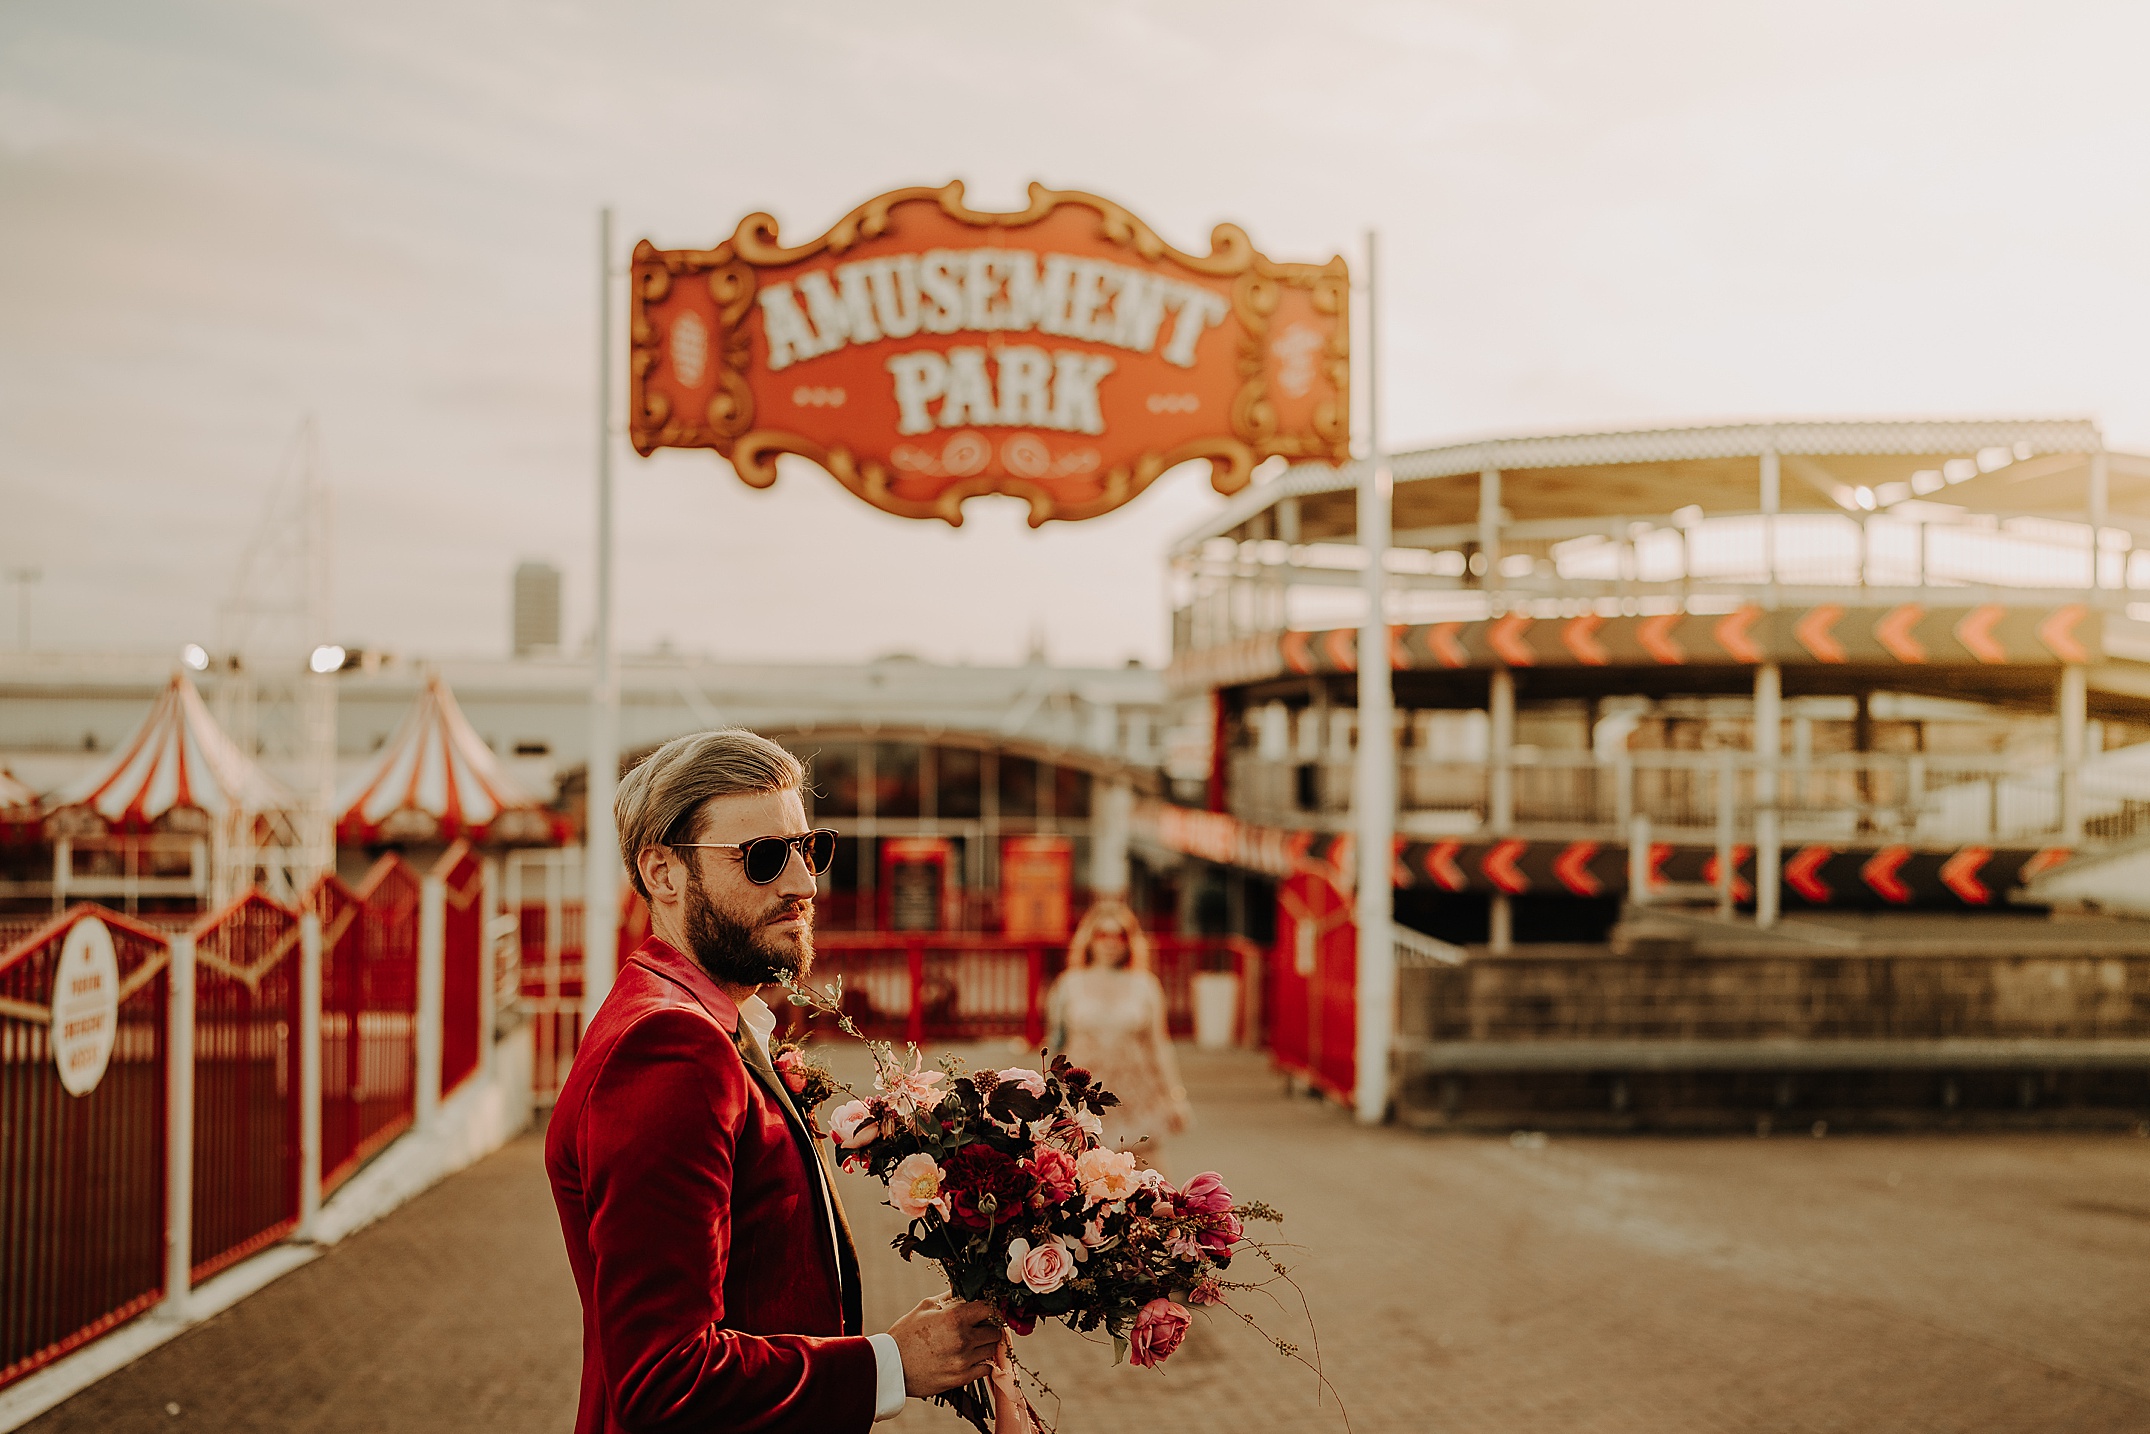 guy wearing red vevert jacket holding bouquet of flowers in front of amusement park sign as she walks towards him scotland engagement photos aberdeen